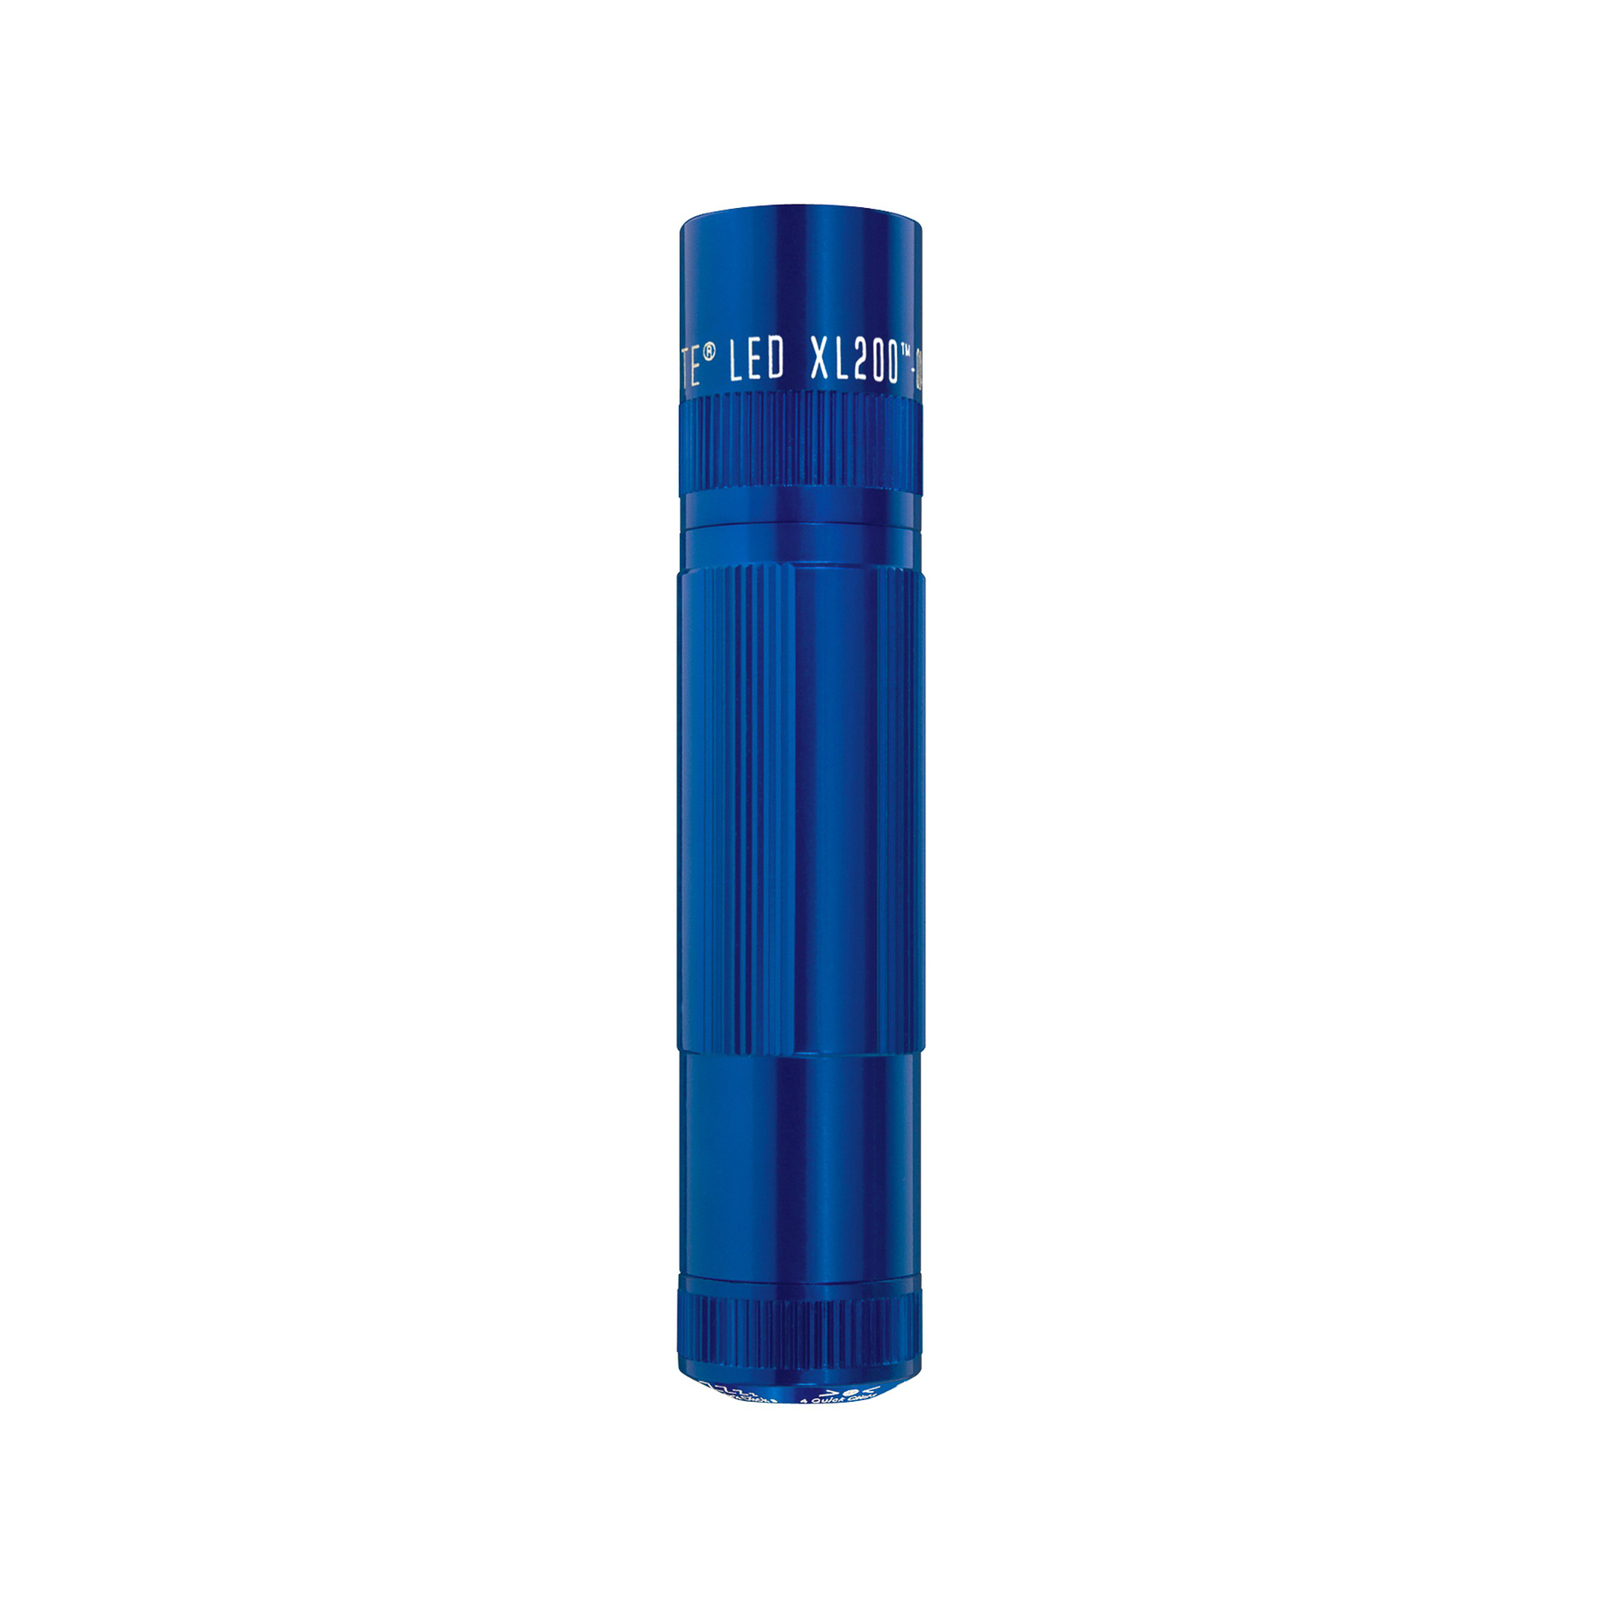 Maglite LED-ficklampa XL200, 3-cell AAA, blå